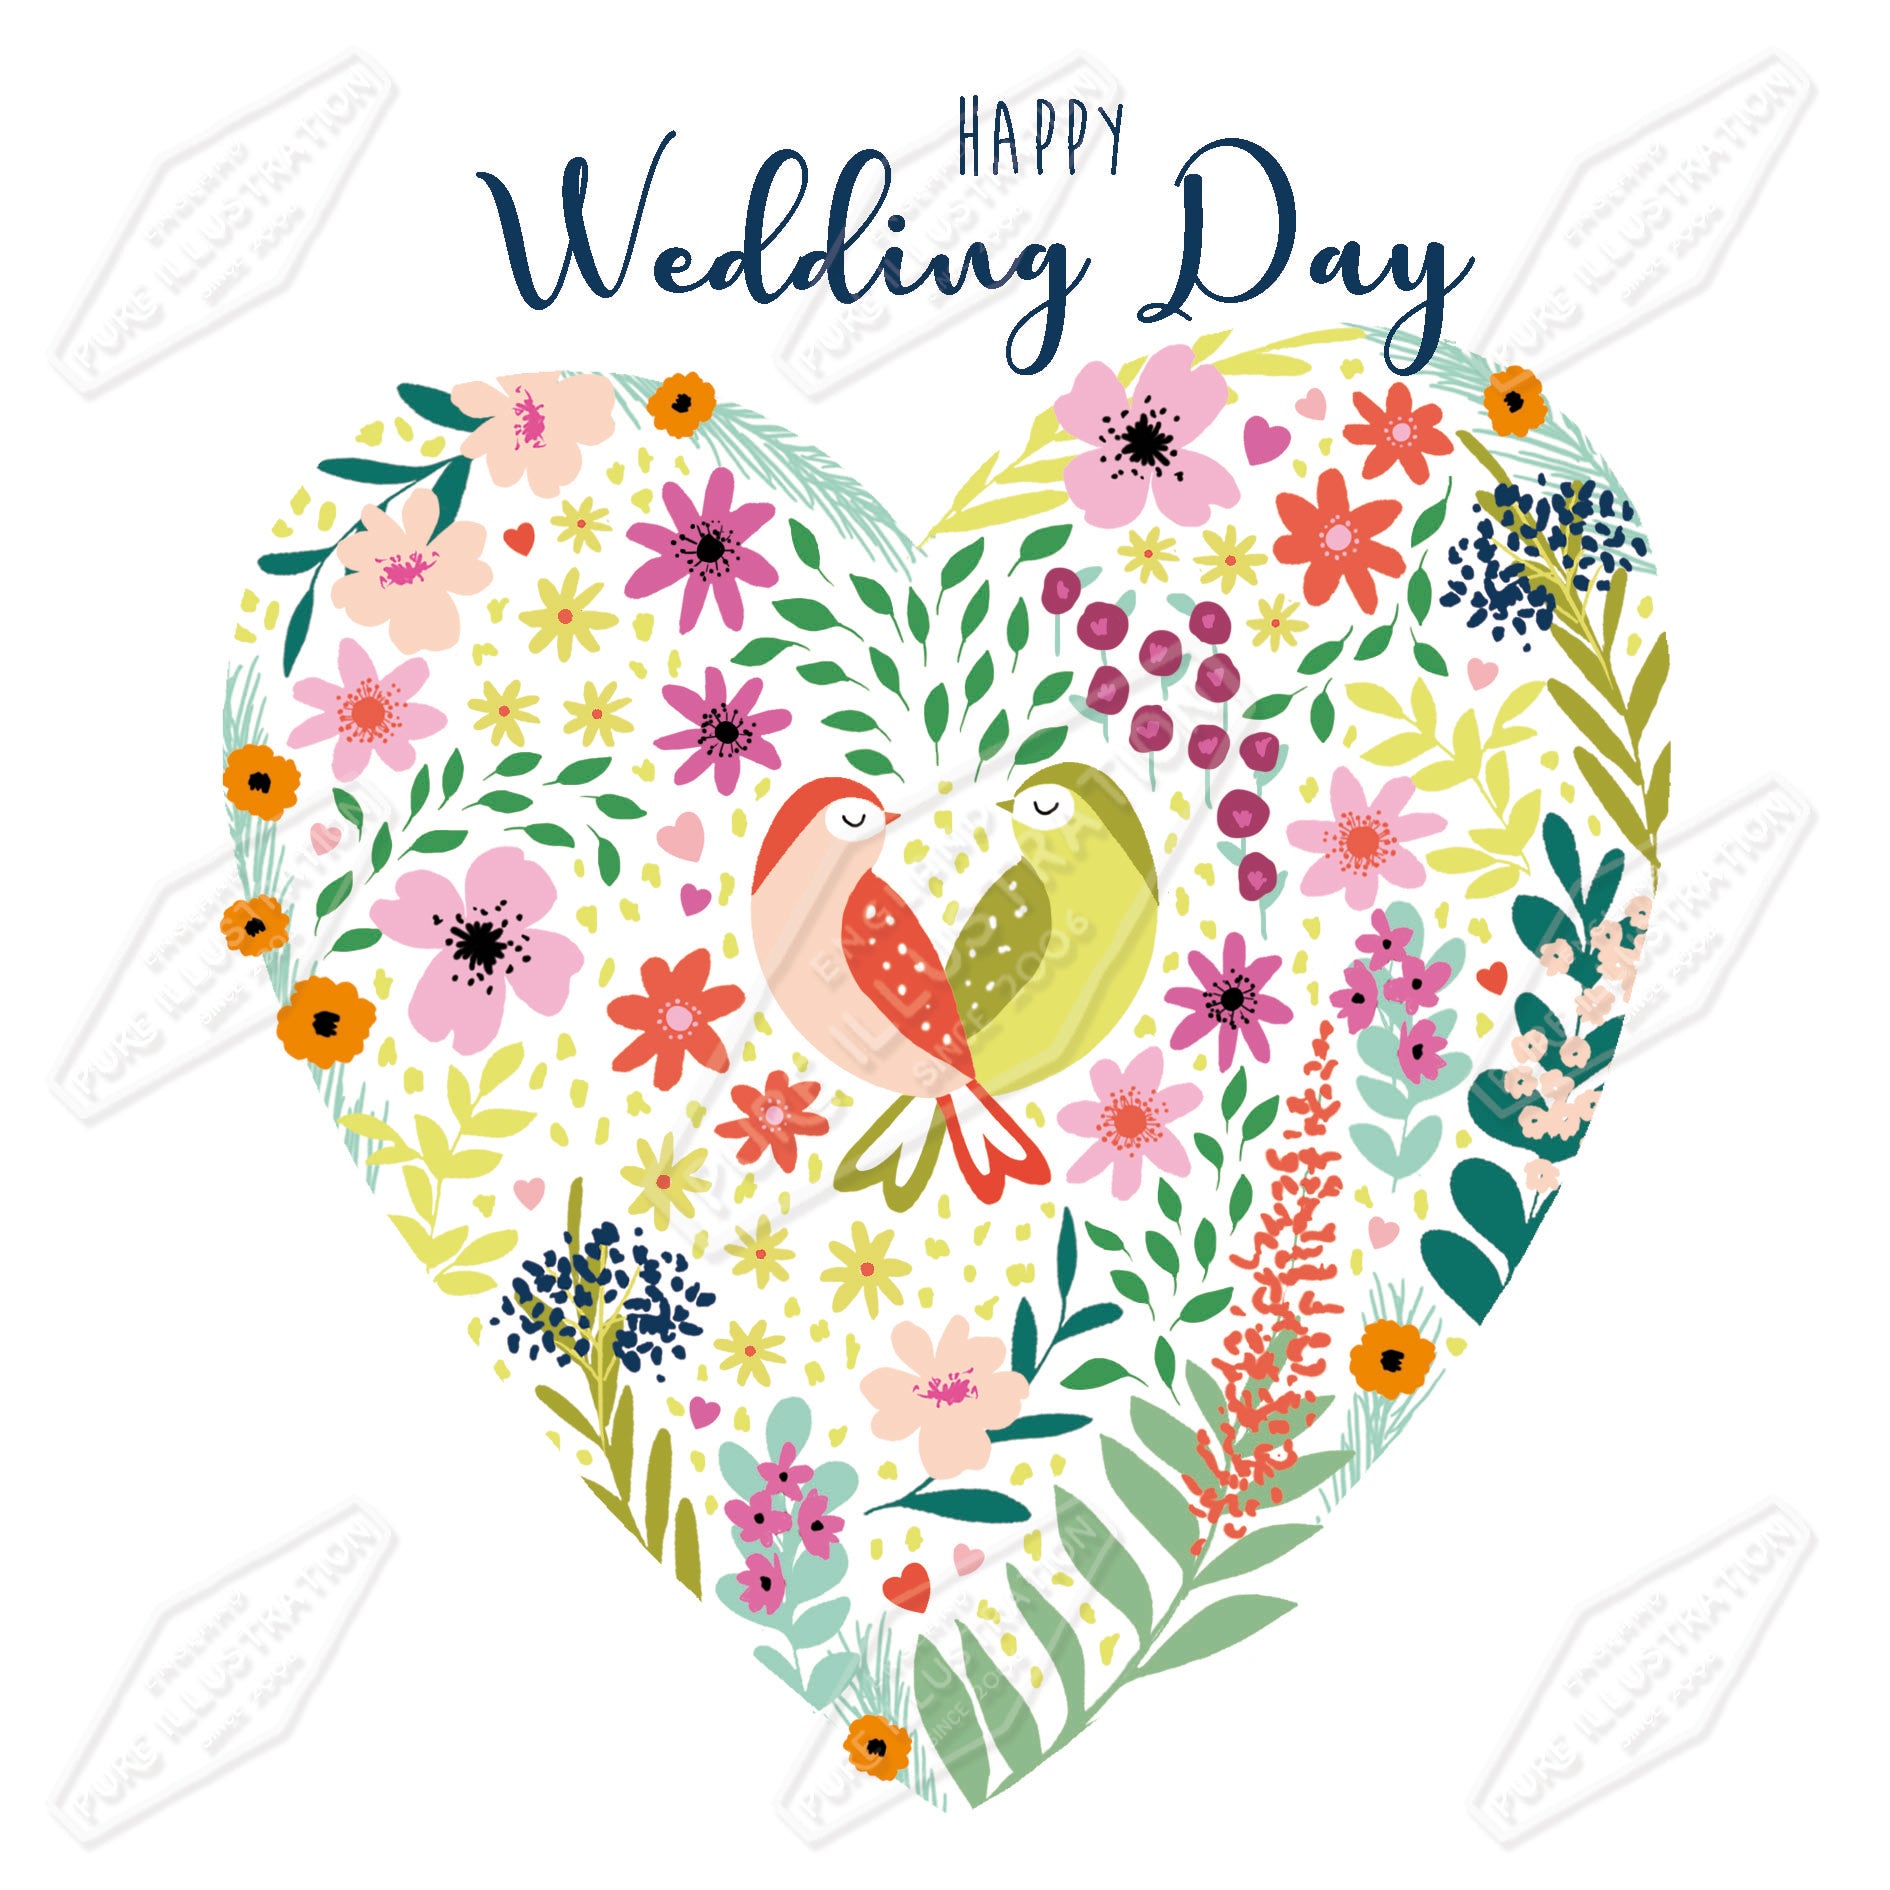 00035479CMI - Caitlin Miller is represented by Pure Art Licensing Agency - Wedding Greeting Card Design